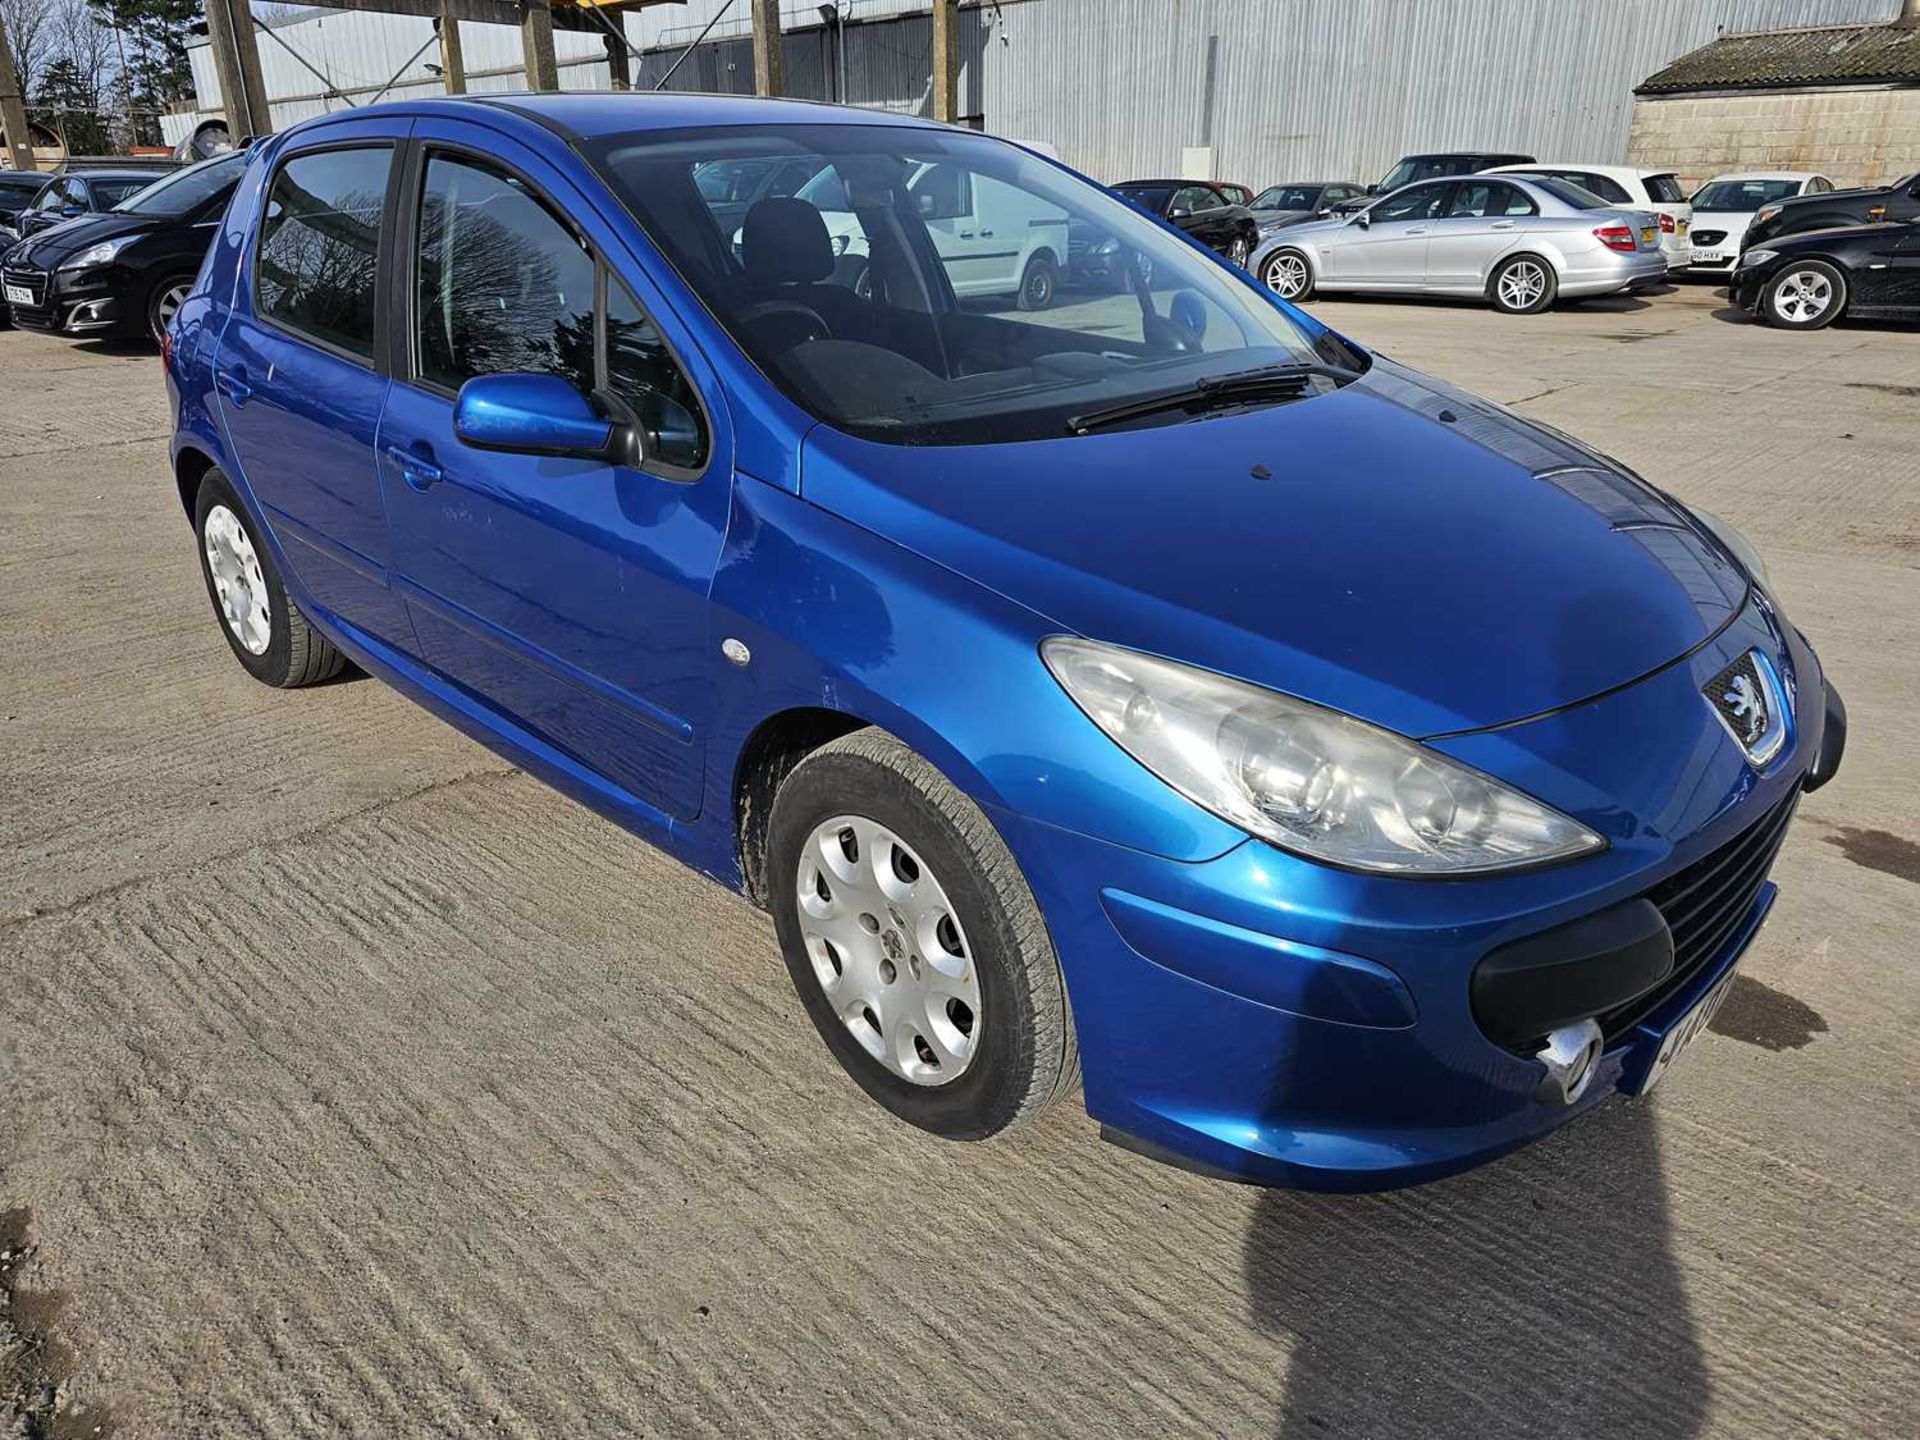 2007 Peugeot 307 X-line, 5 Speed, A/C (Reg. Docs. & Service History Available, Tested 07/24) - Image 34 of 56